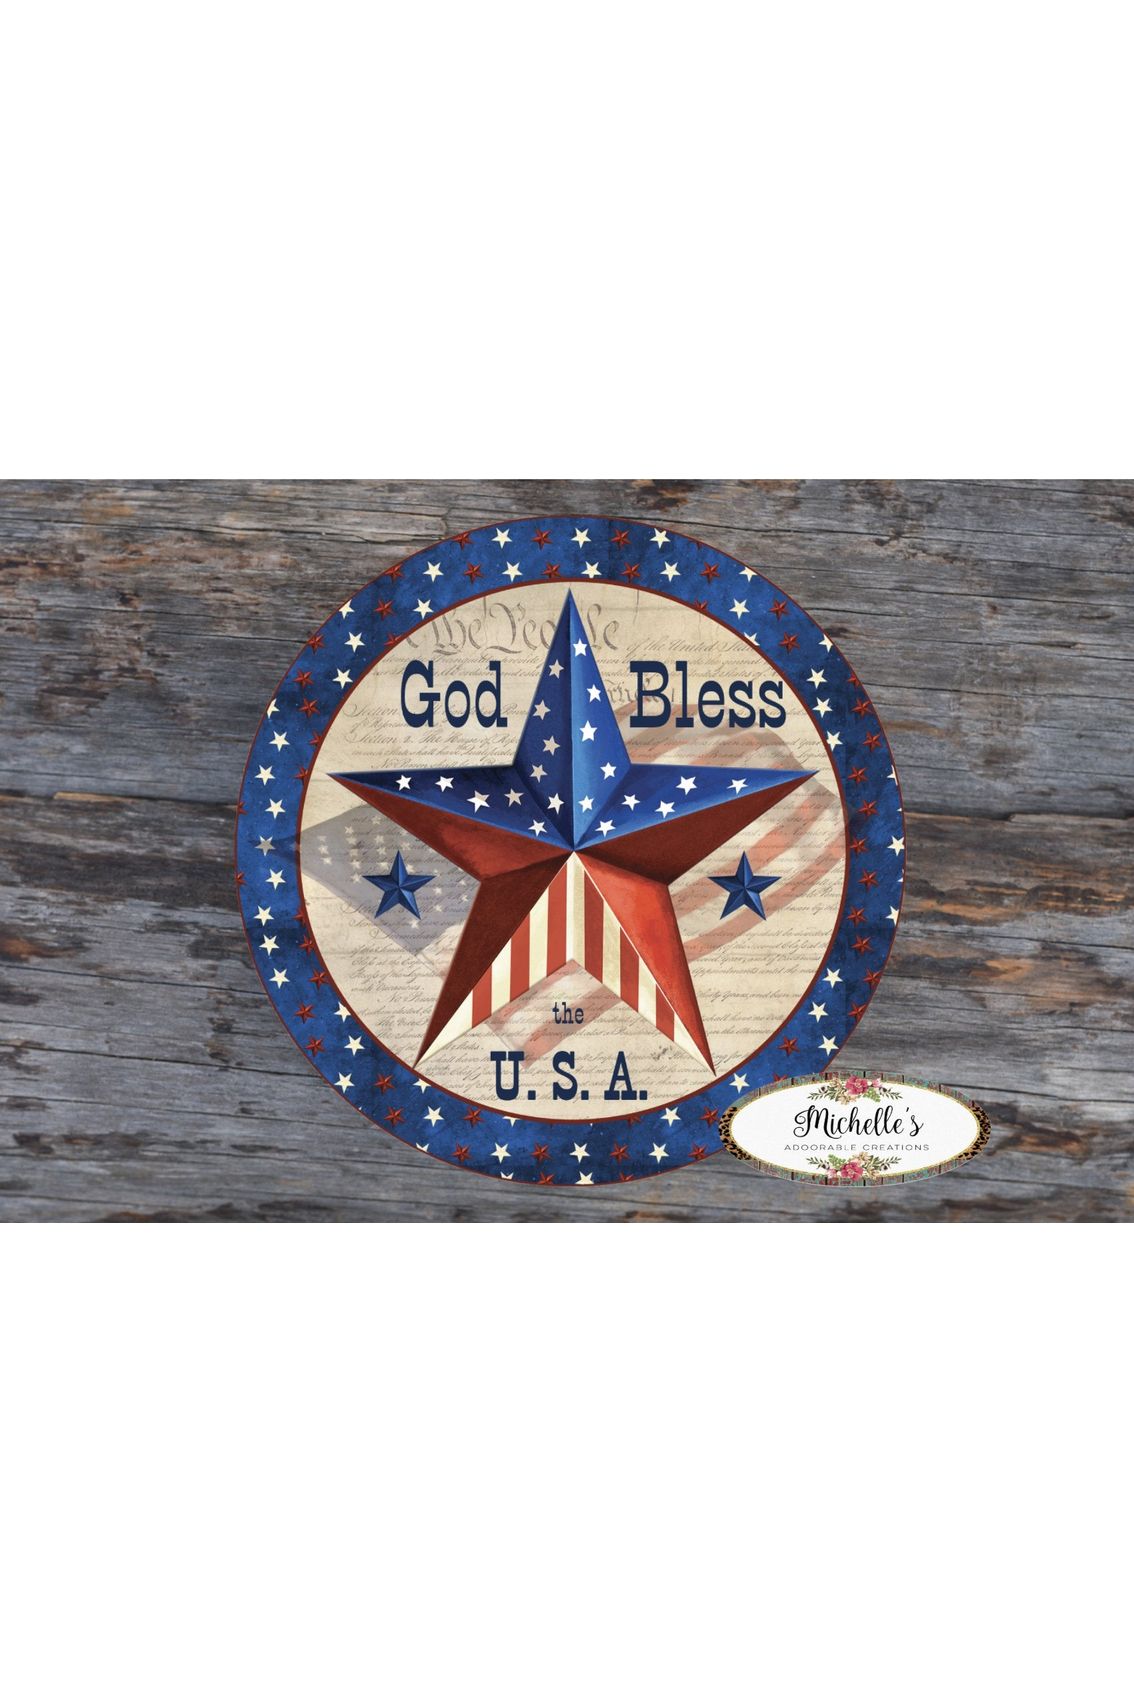 Shop For God Bless The USA Round Sign - Wreath Enhancement